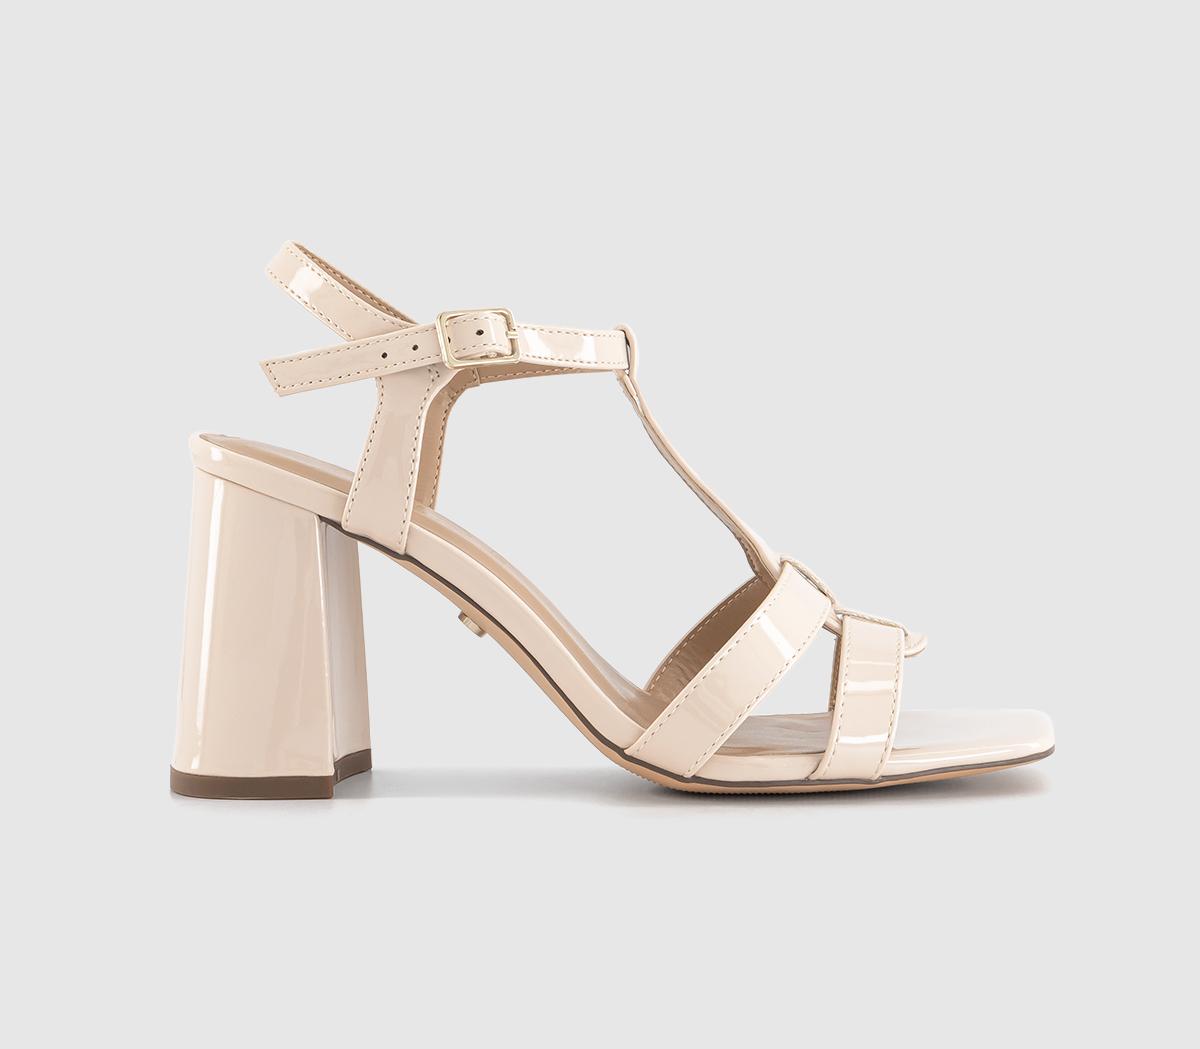 OFFICEHalo Tbar Heeled SandalsWhite Patent